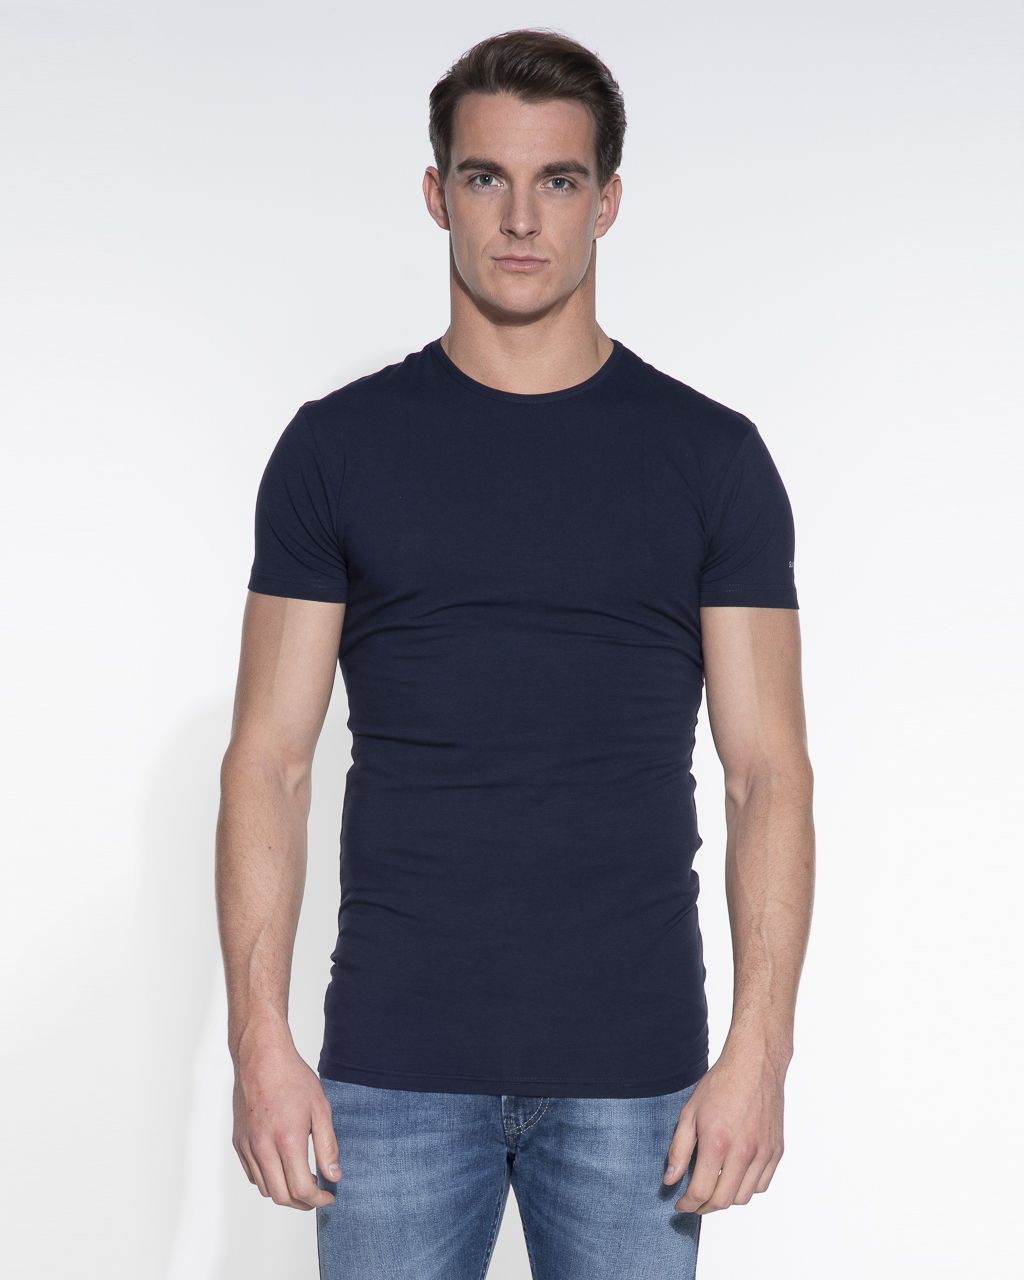 Slater Stretch T-shirt Ronde hals 2-pack Donker blauw 044471-000-L